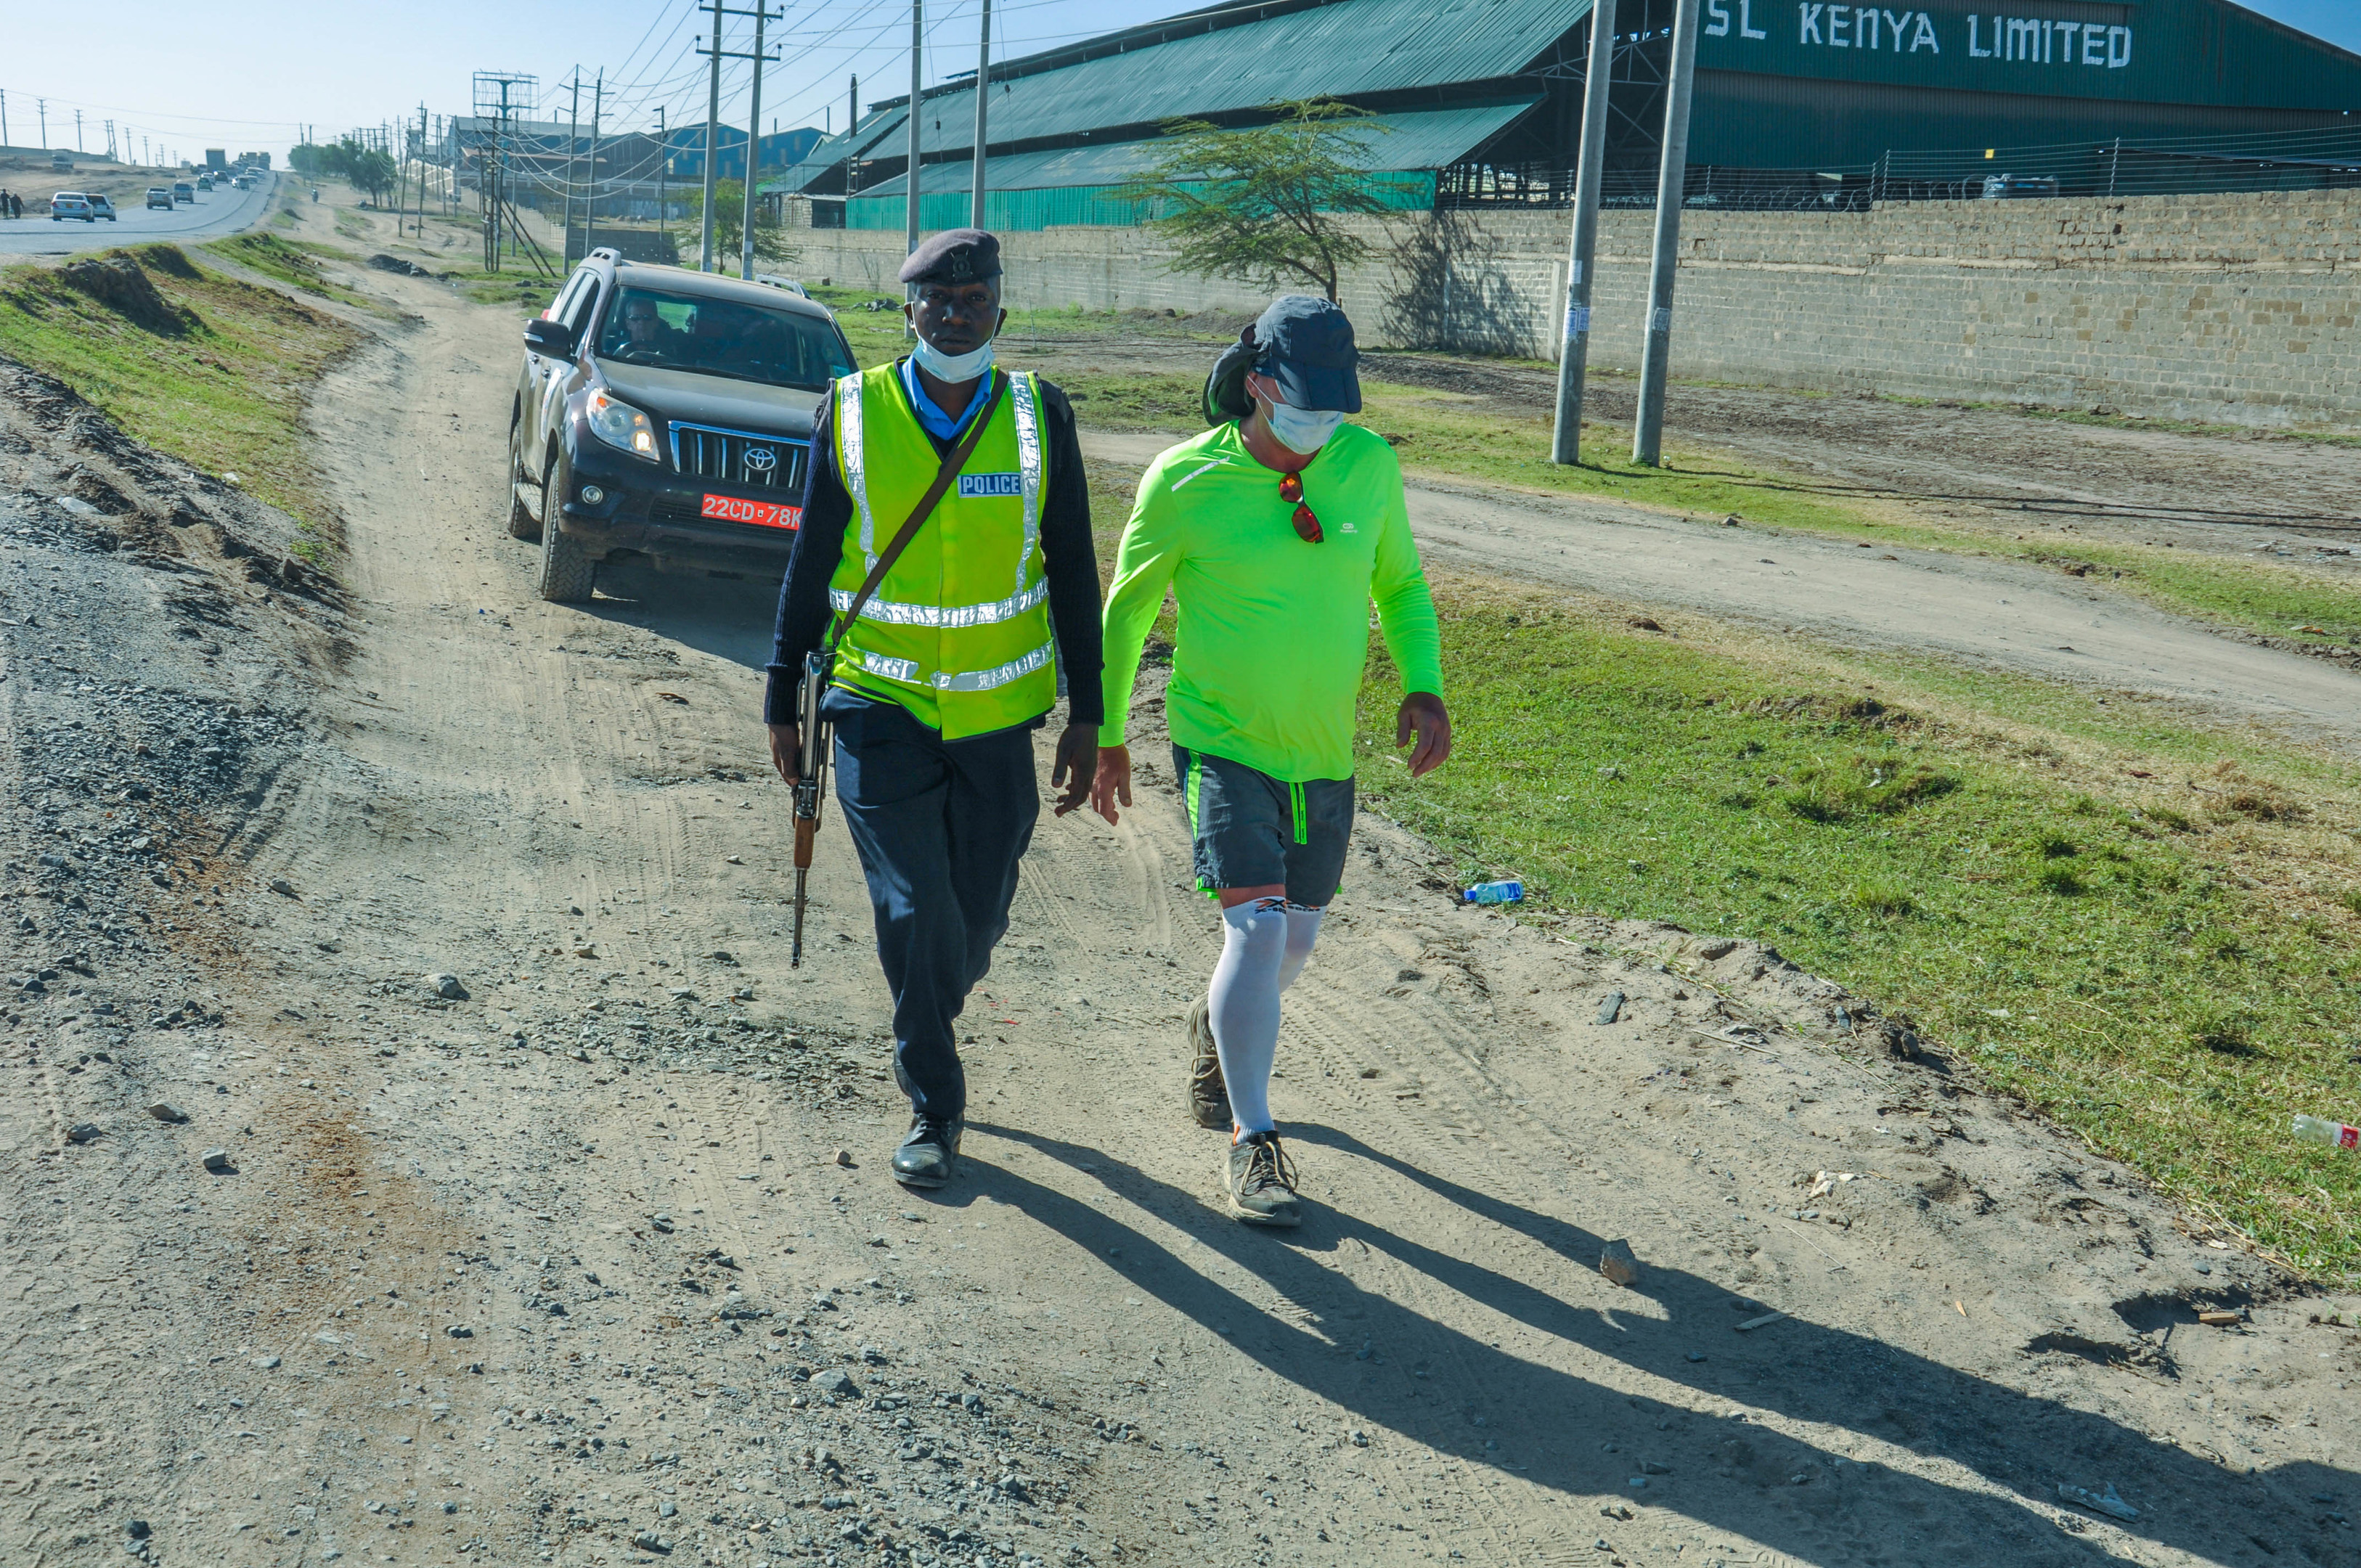 Mark walking with an armed guard during the marathon trek